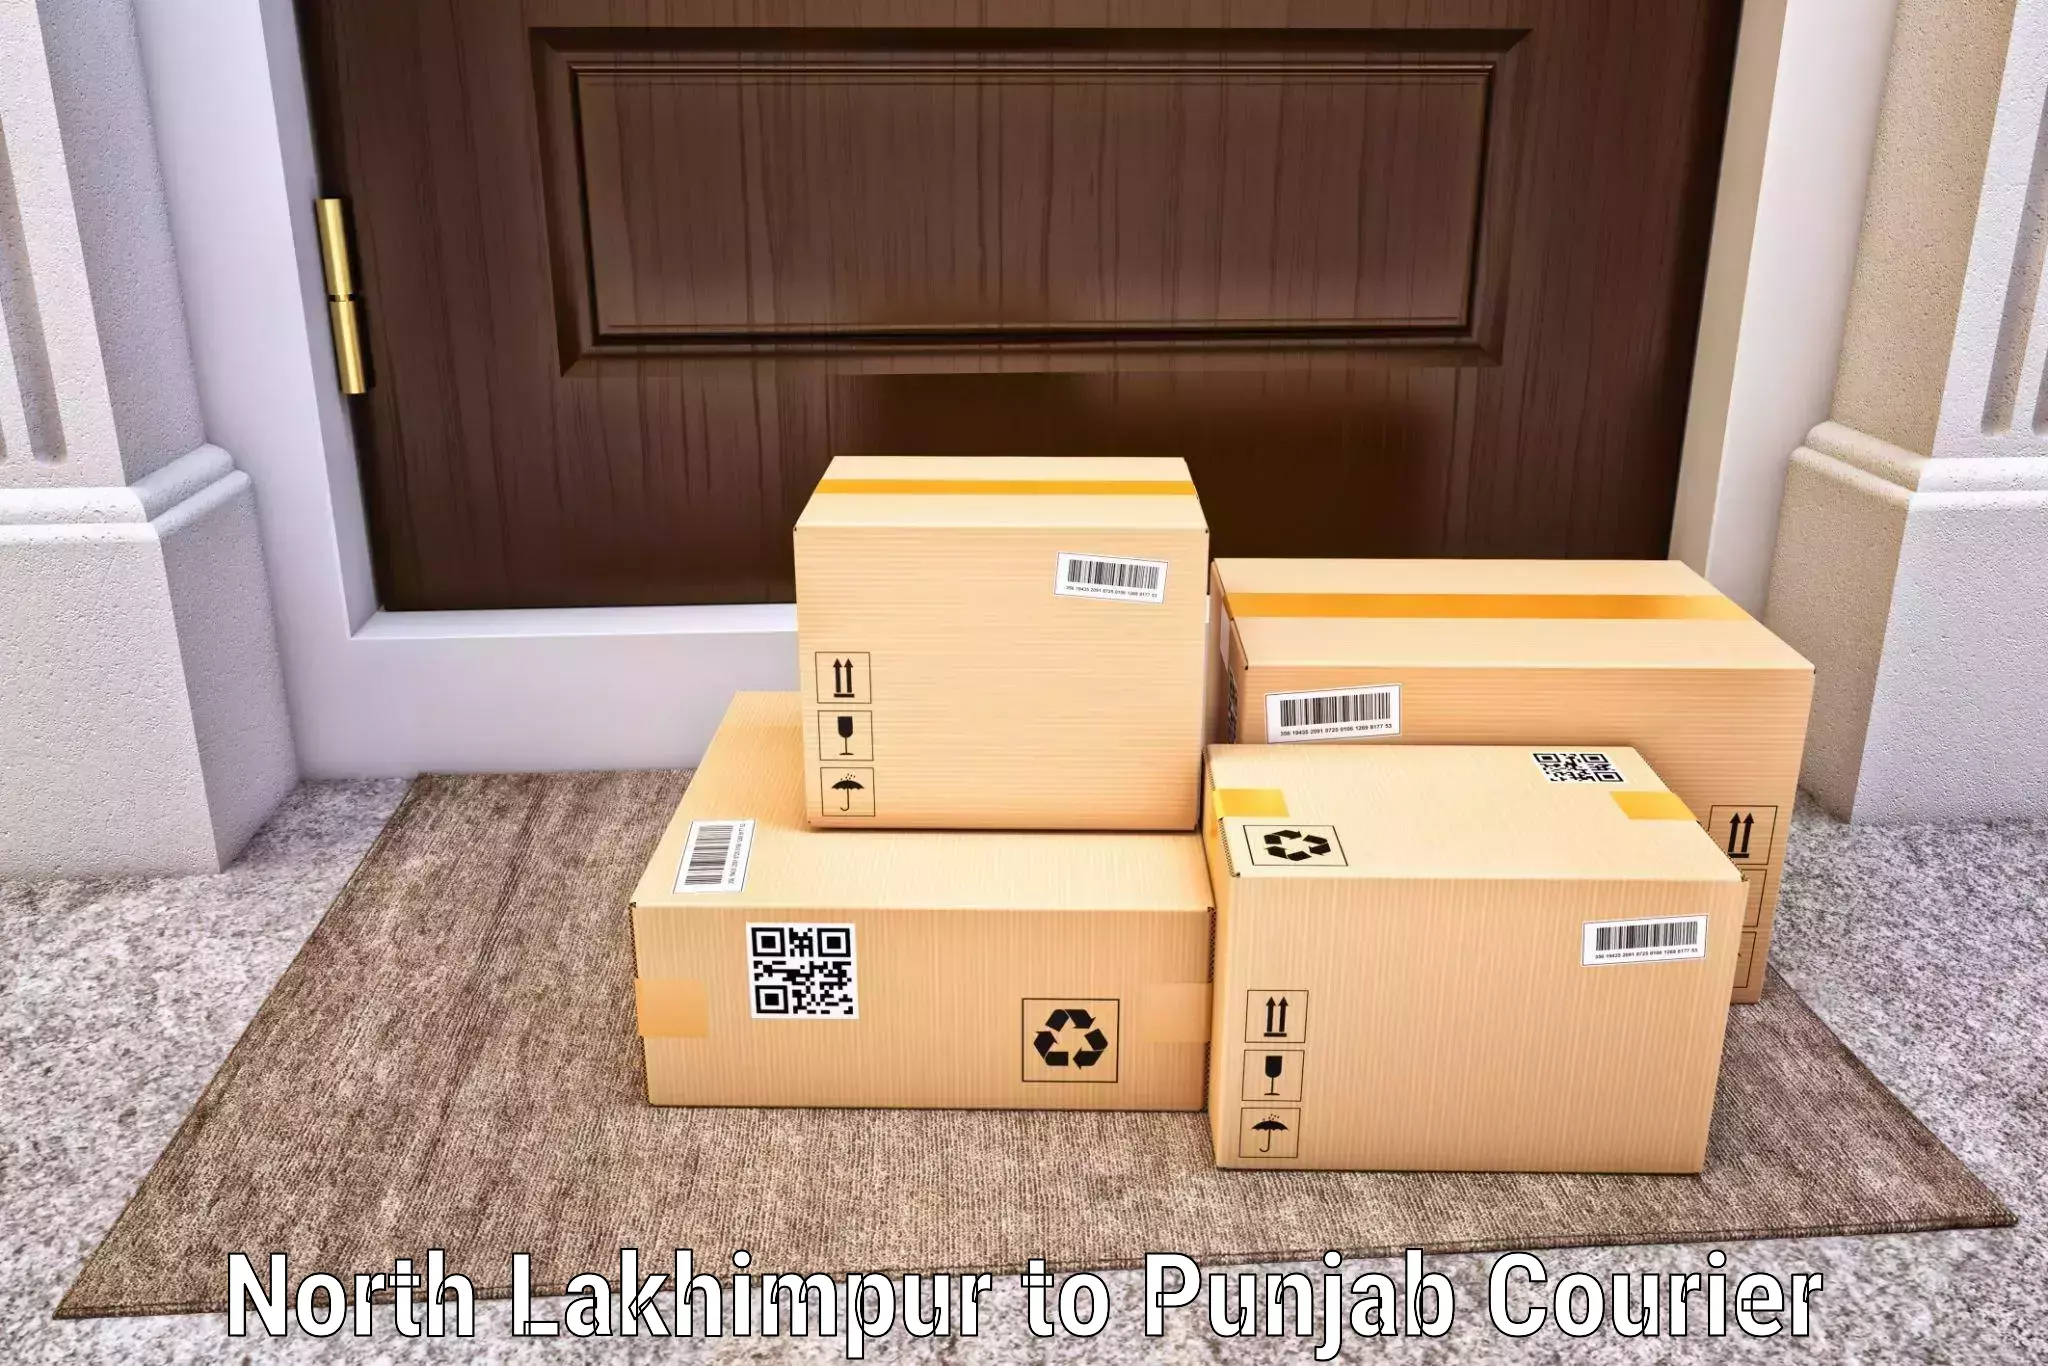 Postal and courier services North Lakhimpur to Fatehgarh Sahib